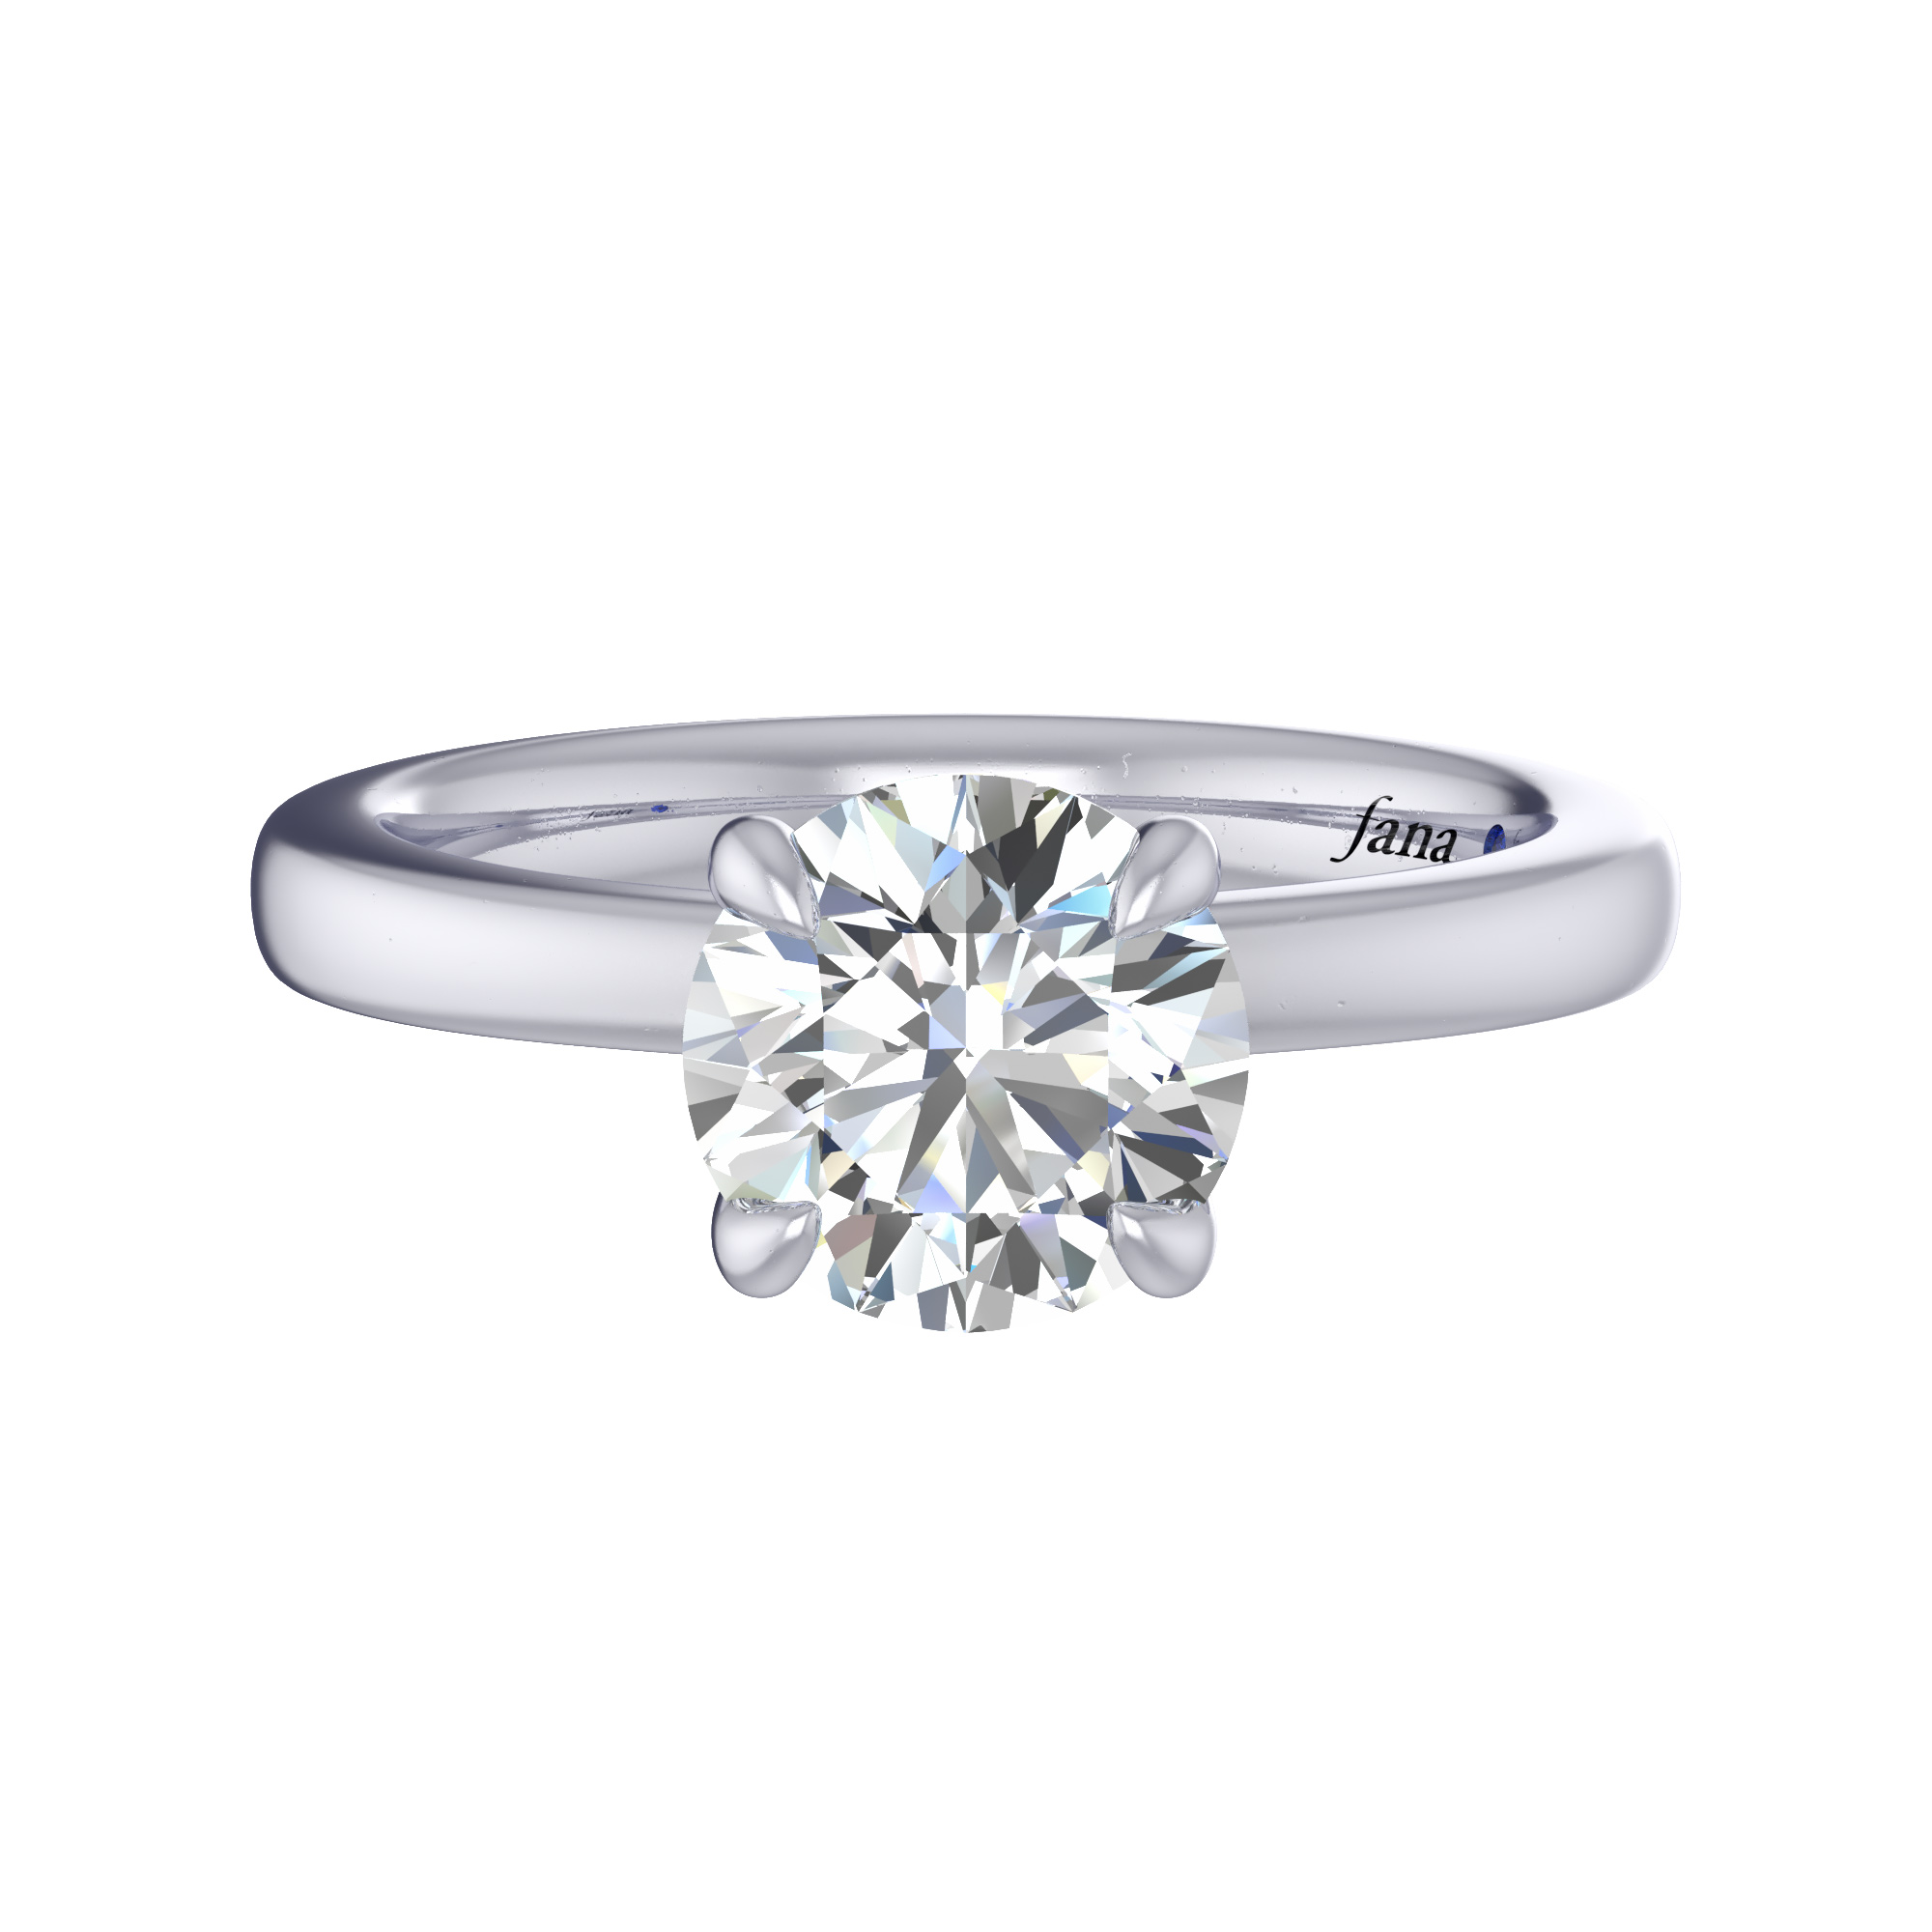 14K White Gold Solitaire Ring Setting for 0.75 ct Diamond | Borsheims